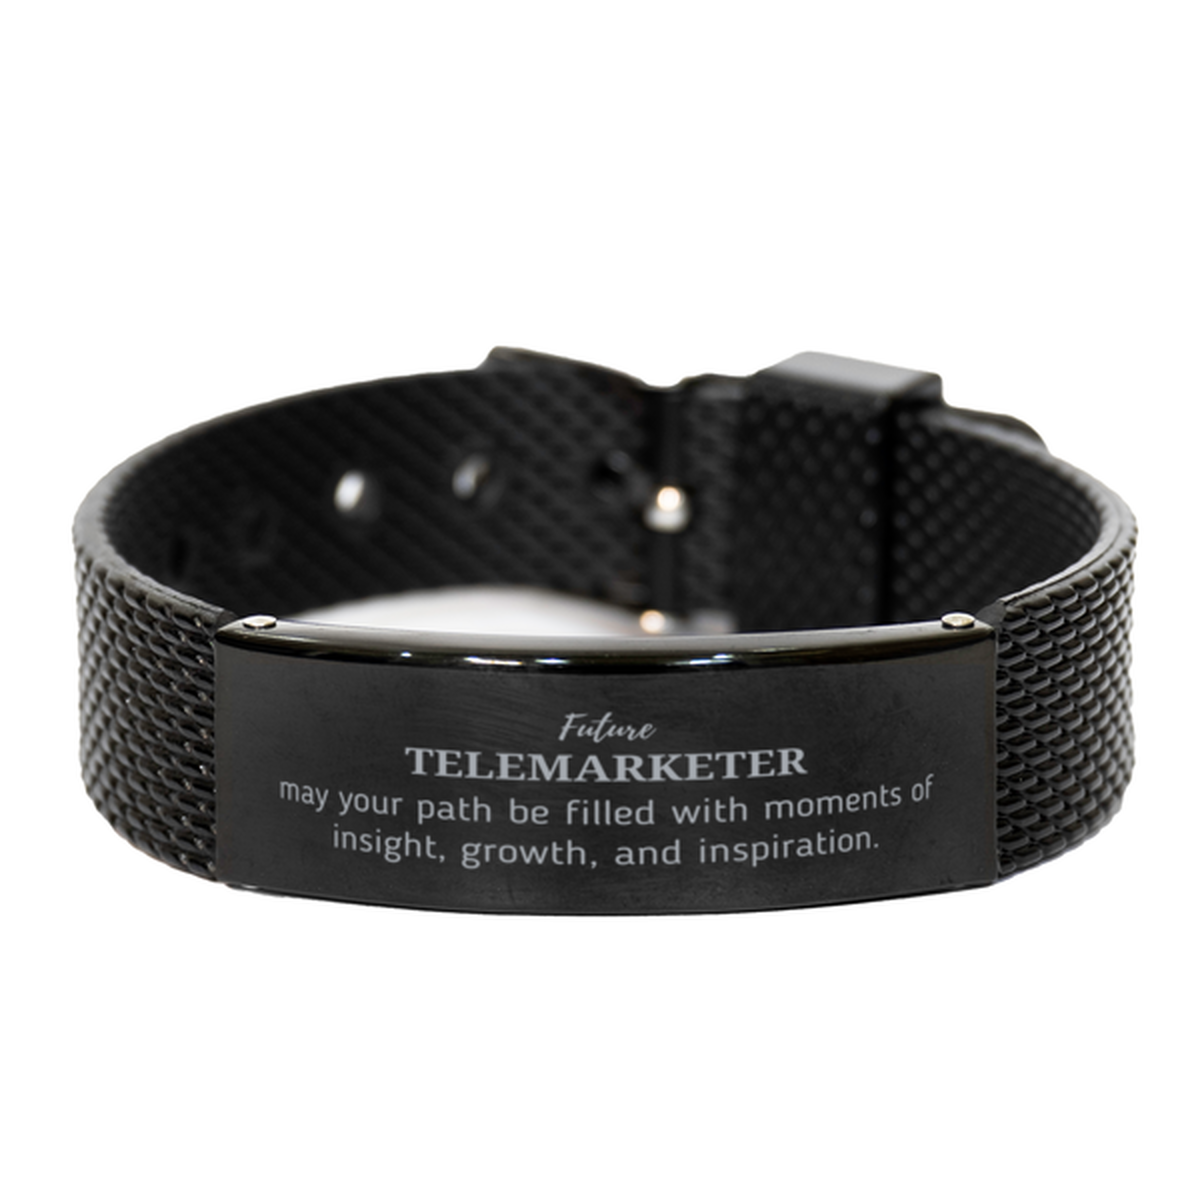 Future Telemarketer Gifts, May your path be filled with moments of insight, Graduation Gifts for New Telemarketer, Christmas Unique Black Shark Mesh Bracelet For Men, Women, Friends